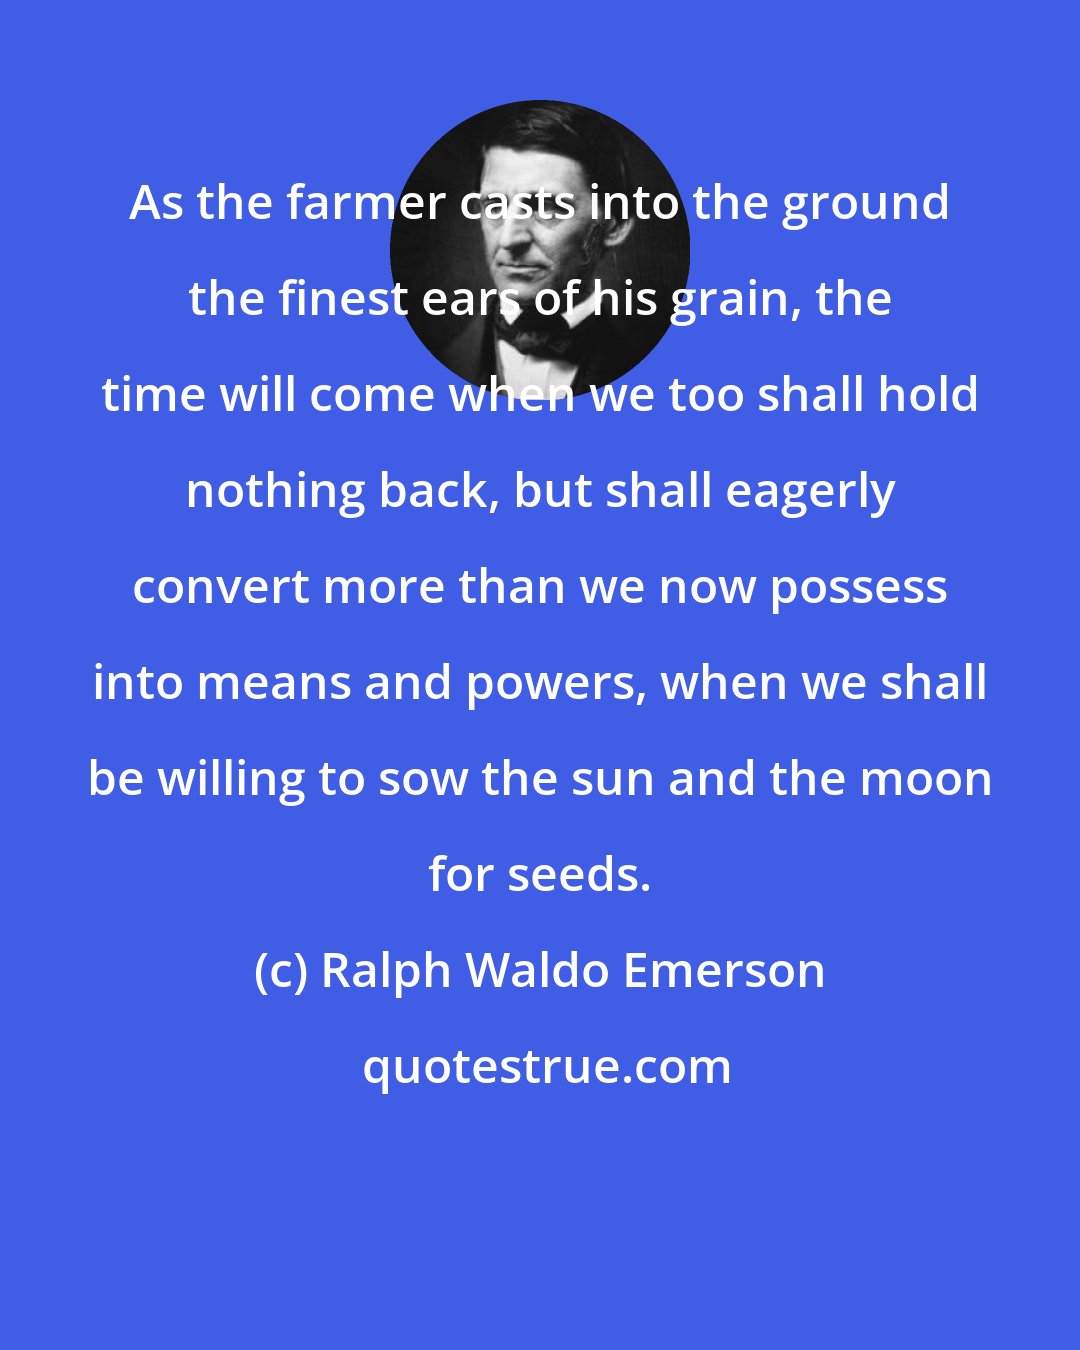 Ralph Waldo Emerson: As the farmer casts into the ground the finest ears of his grain, the time will come when we too shall hold nothing back, but shall eagerly convert more than we now possess into means and powers, when we shall be willing to sow the sun and the moon for seeds.